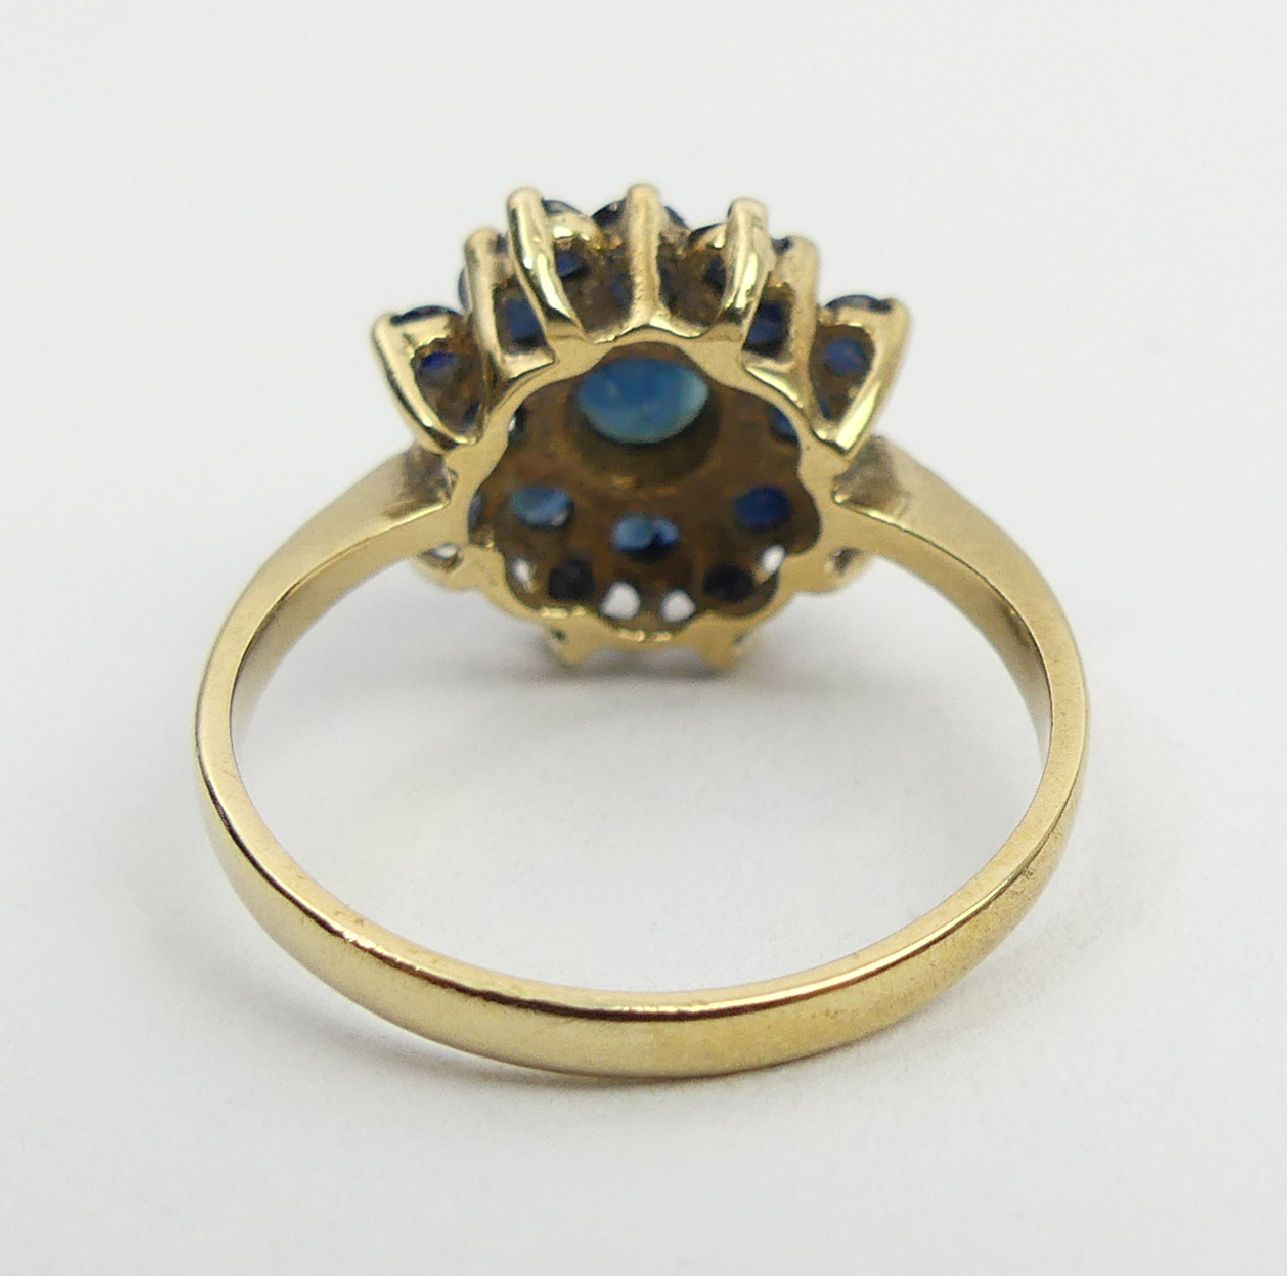 9ct gold sapphire cluster ring, Birm. 1980, 3.4 grams, 14mm, size Q. UK postage £12 - Image 5 of 6